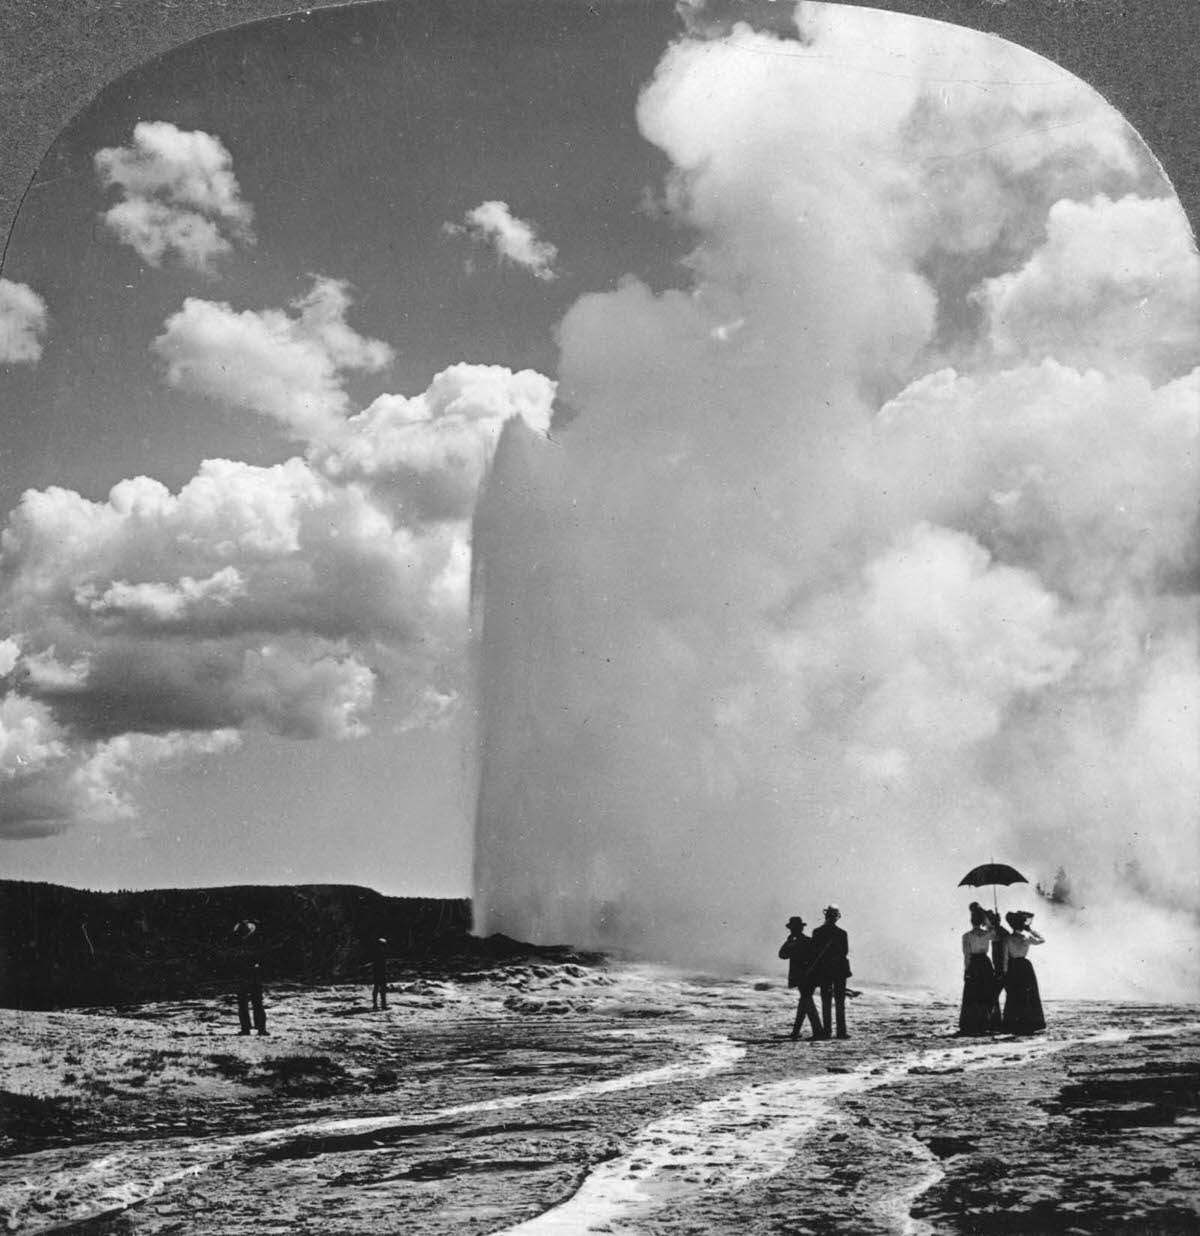 Tourists at Old Faithful in Yellowstone, 1901.